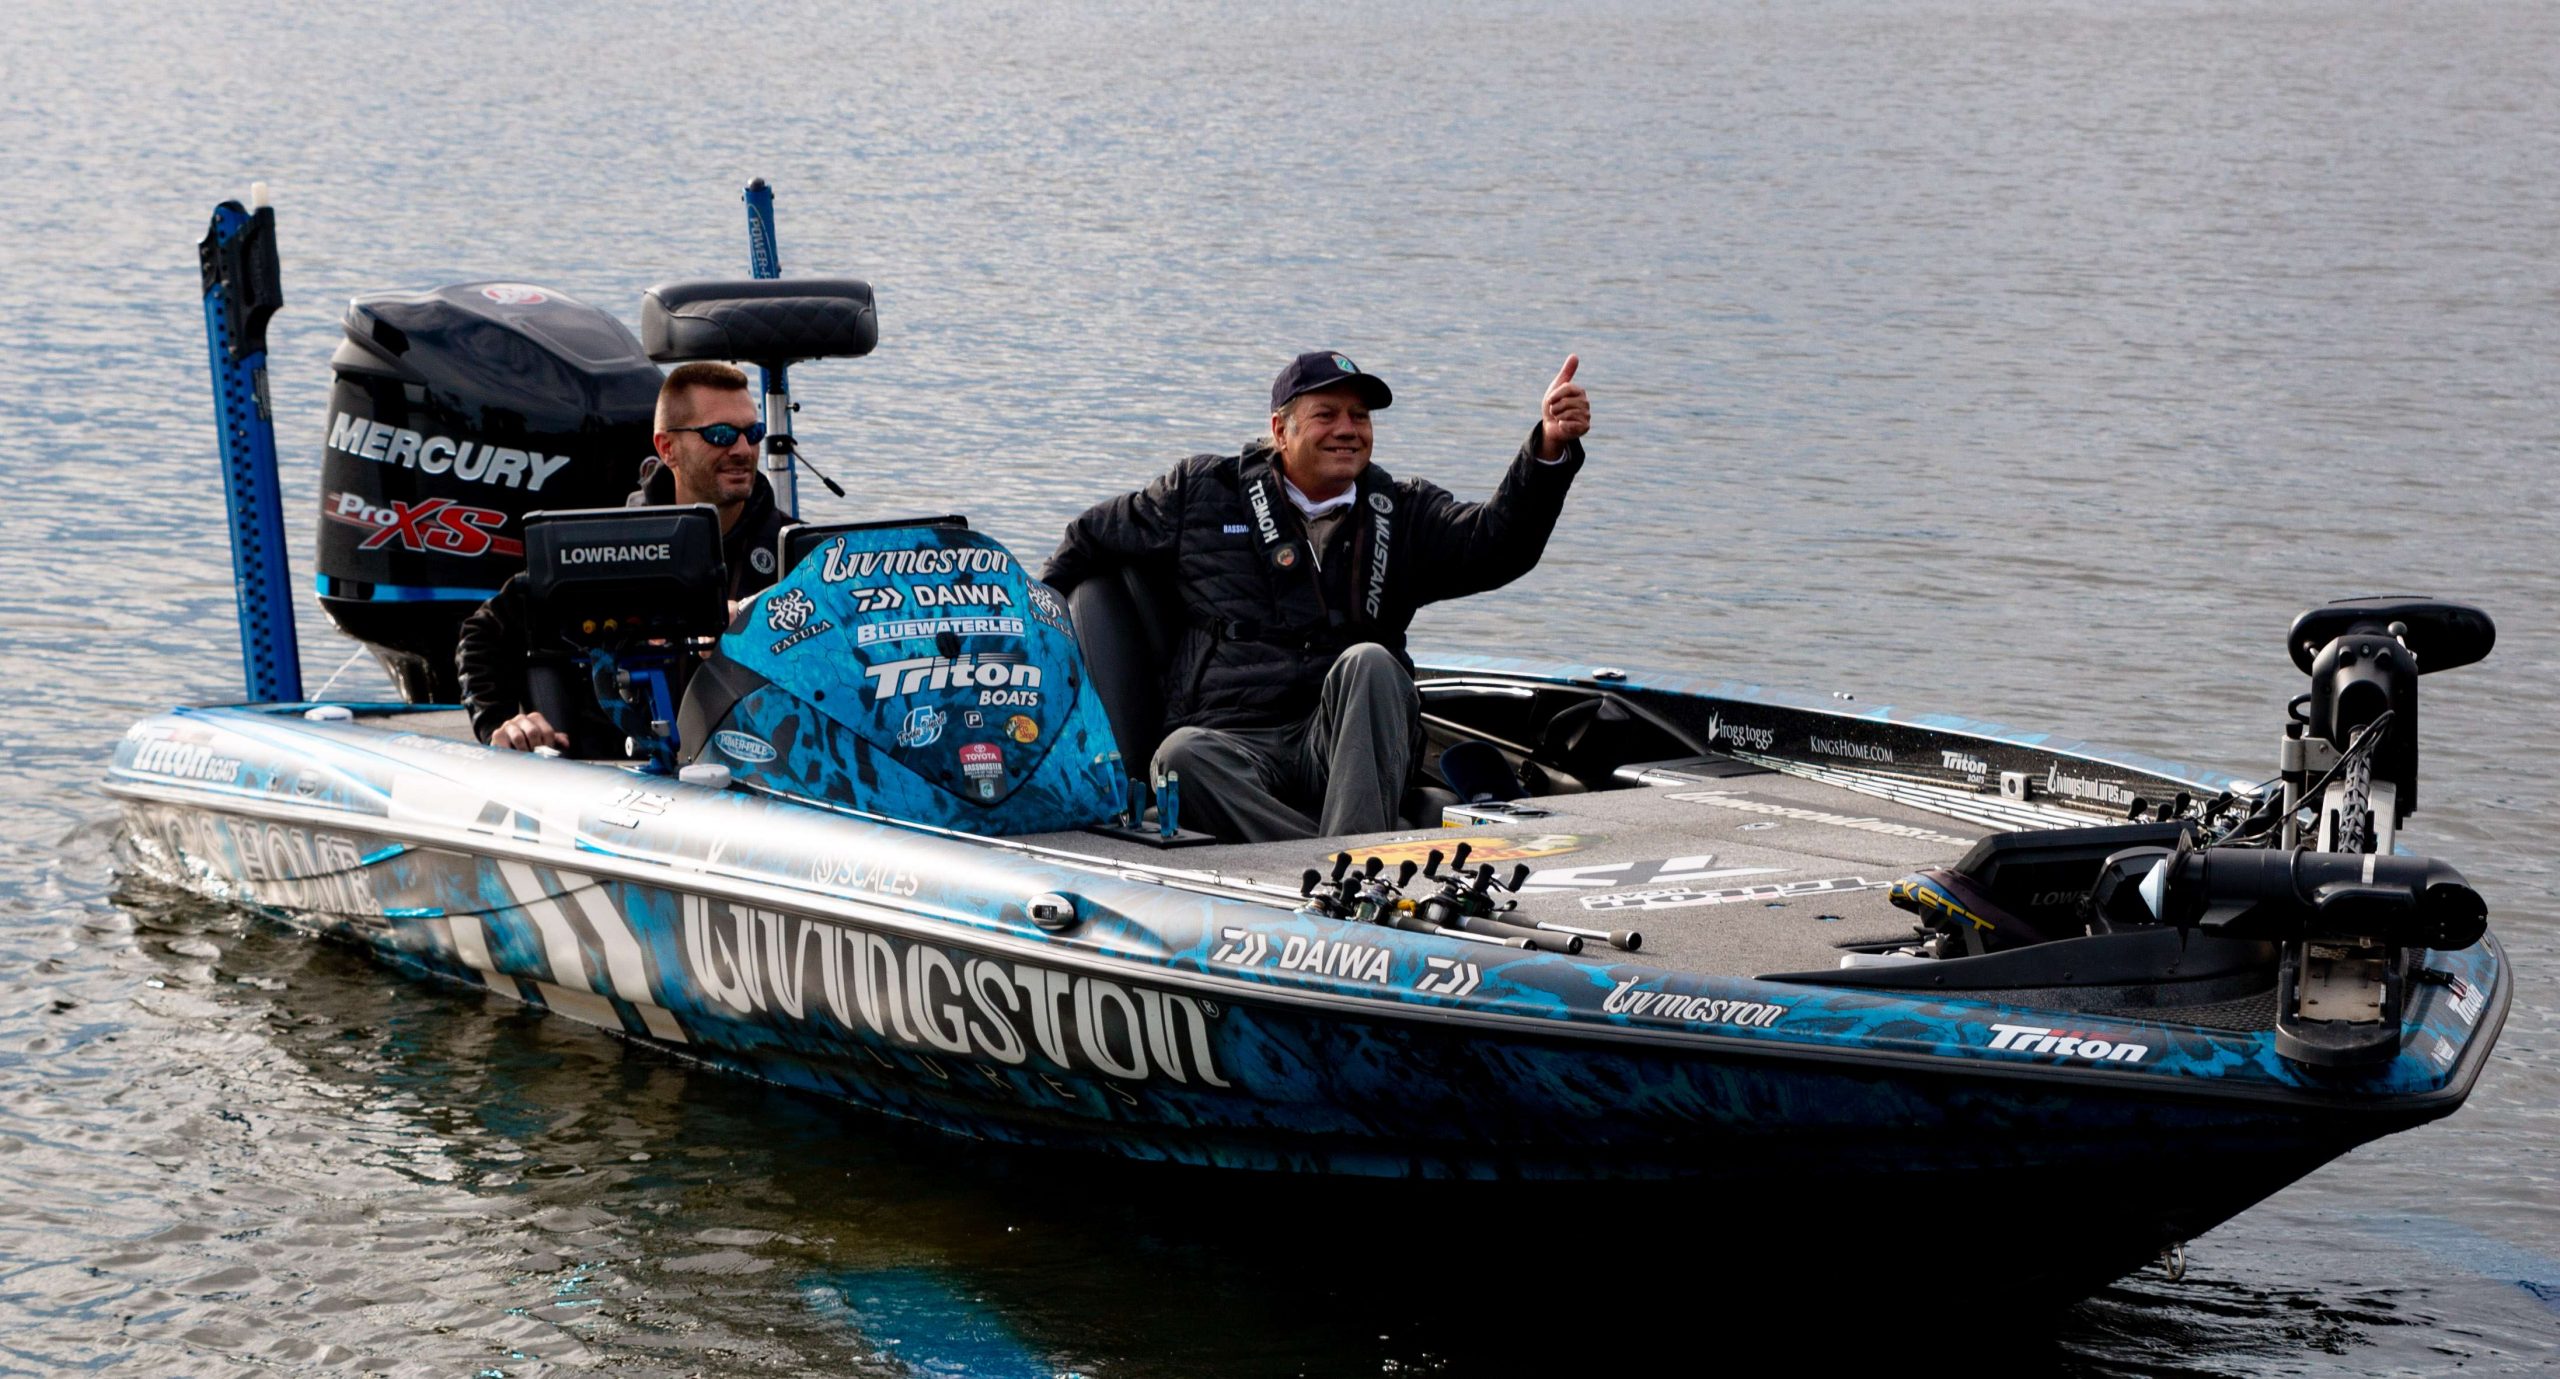 Big thumbs up from Walt as they began their day of fishing.  Randy promised to take him to all the secret spots.